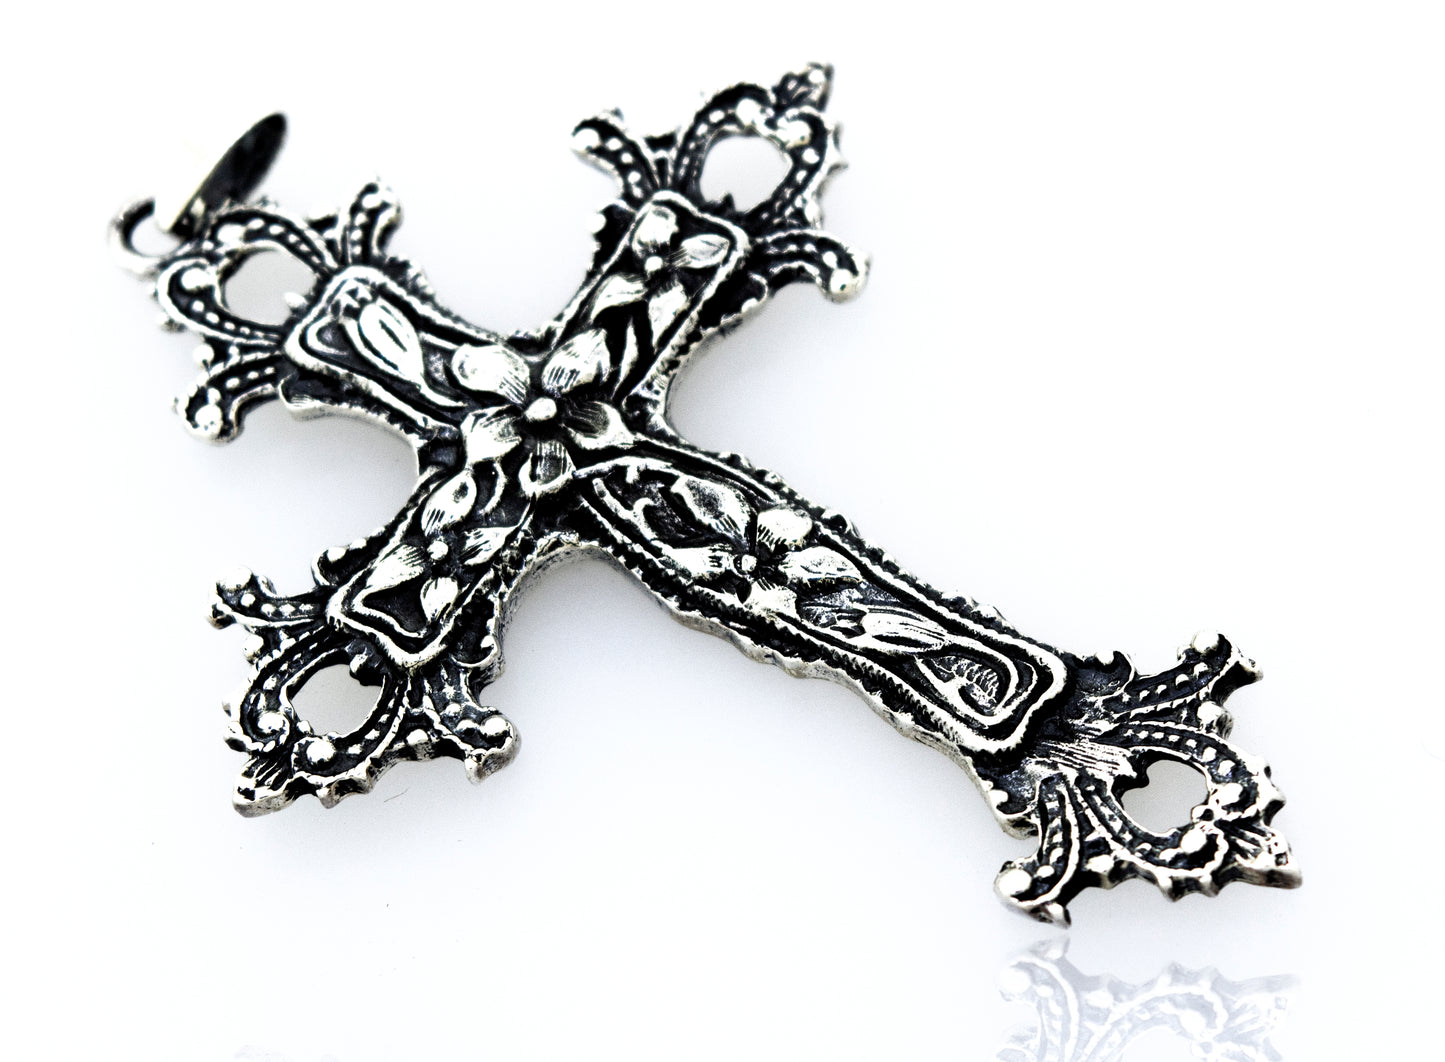 A vintage style, Medieval Floral Cross Pendant, serving as a statement centerpiece on a white surface.